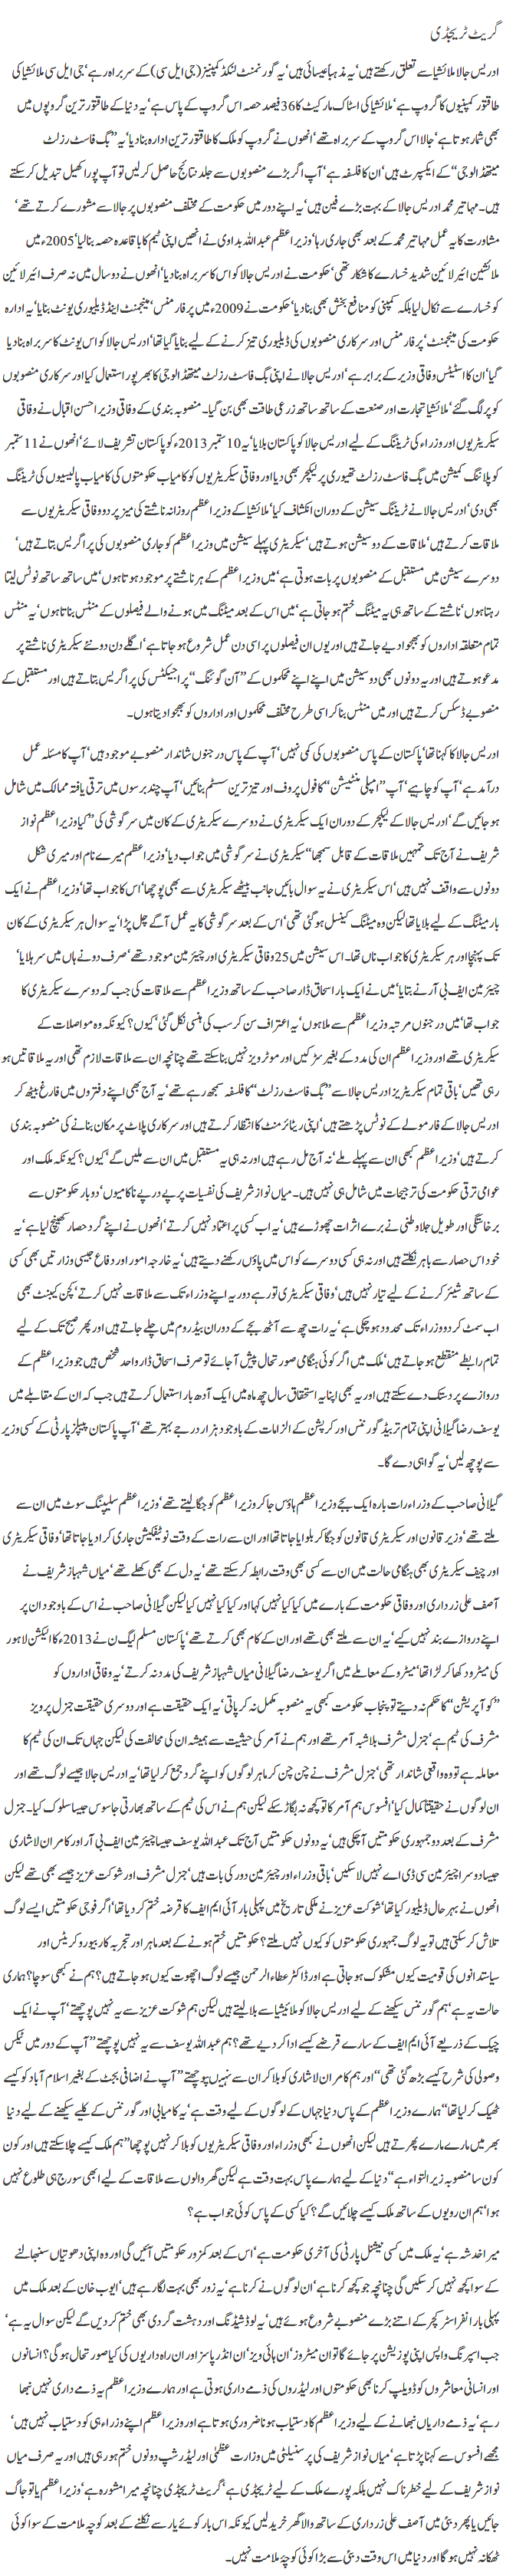 Great Tragedy by Javed Chaudhry